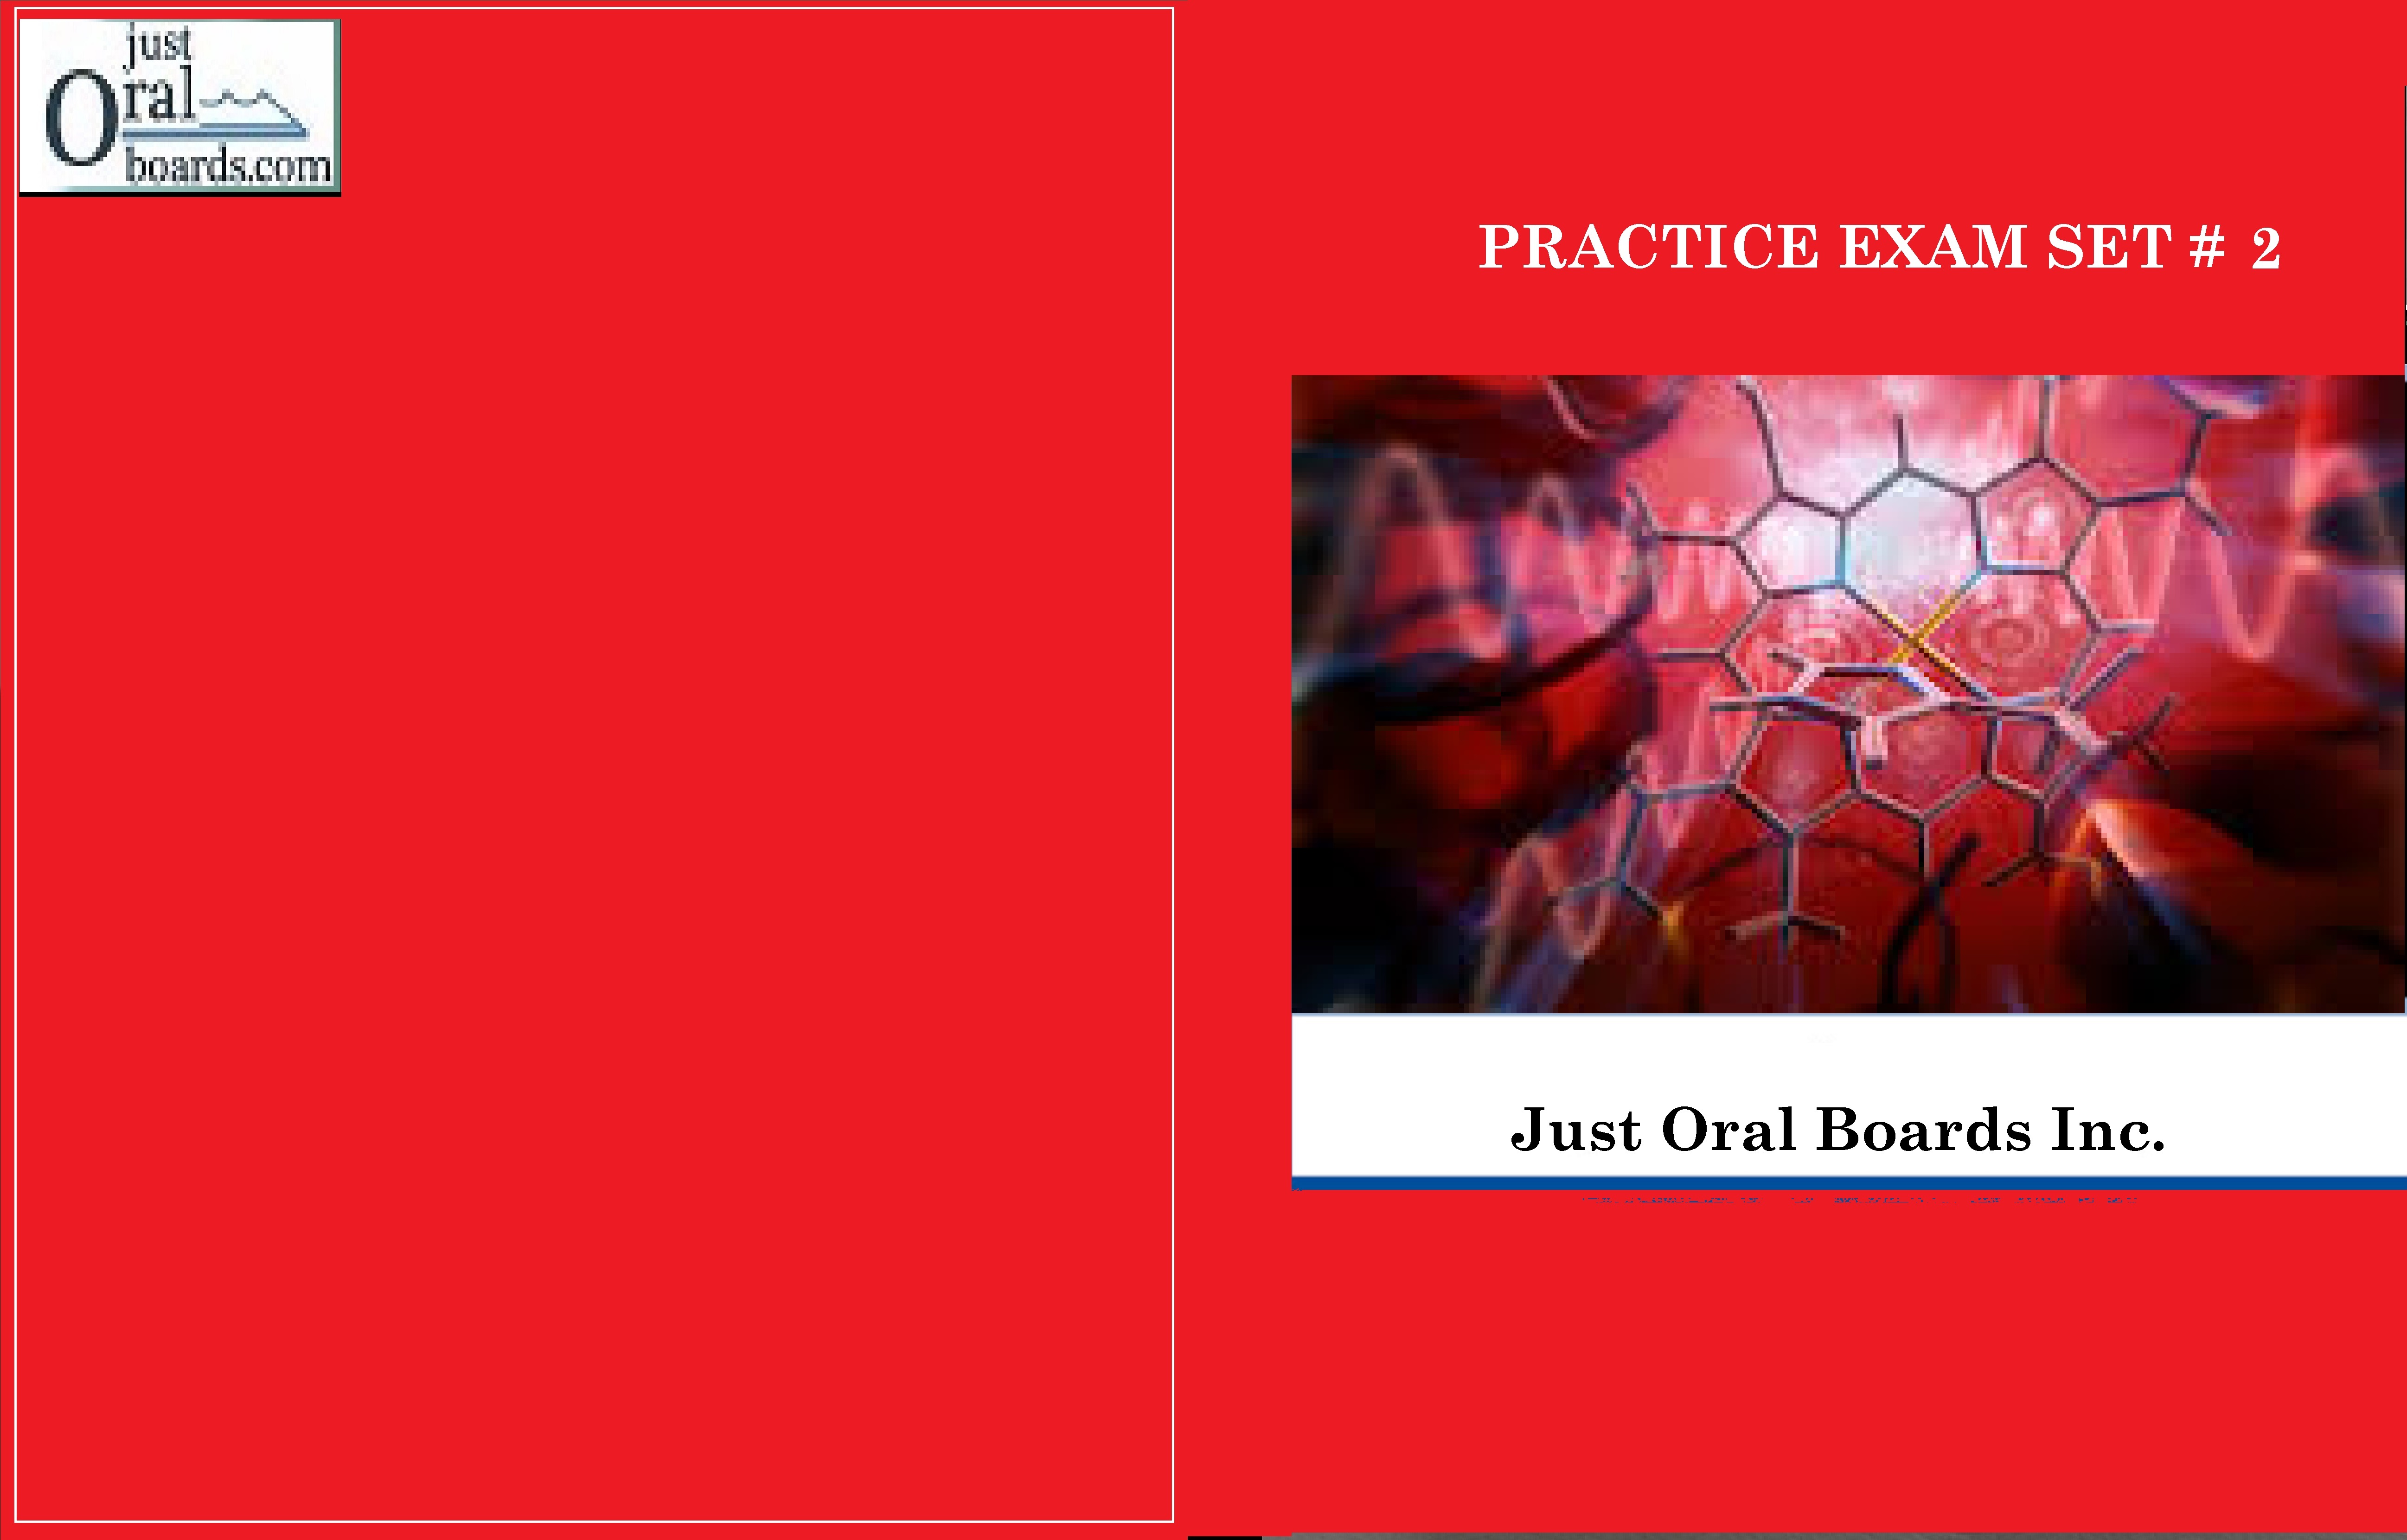 Comprehensive Student Manual Package + Practice Exam Sets